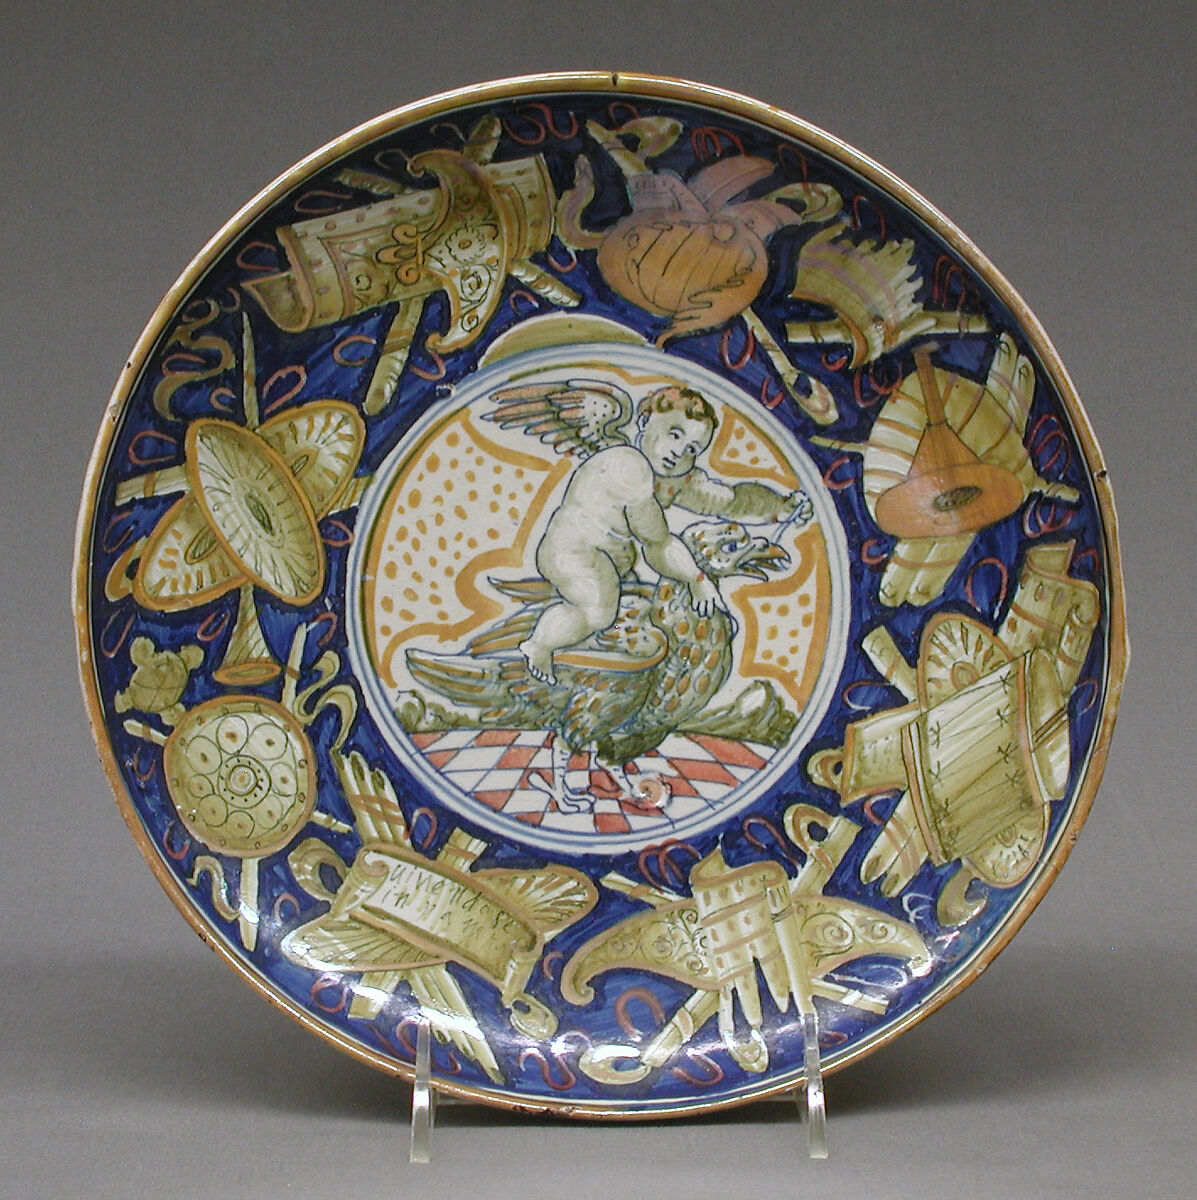 Tazza with Ganymede and the eagle, Maiolica (tin-glazed earthenware), lustered, Italian, Castel Durante with Gubbio luster 